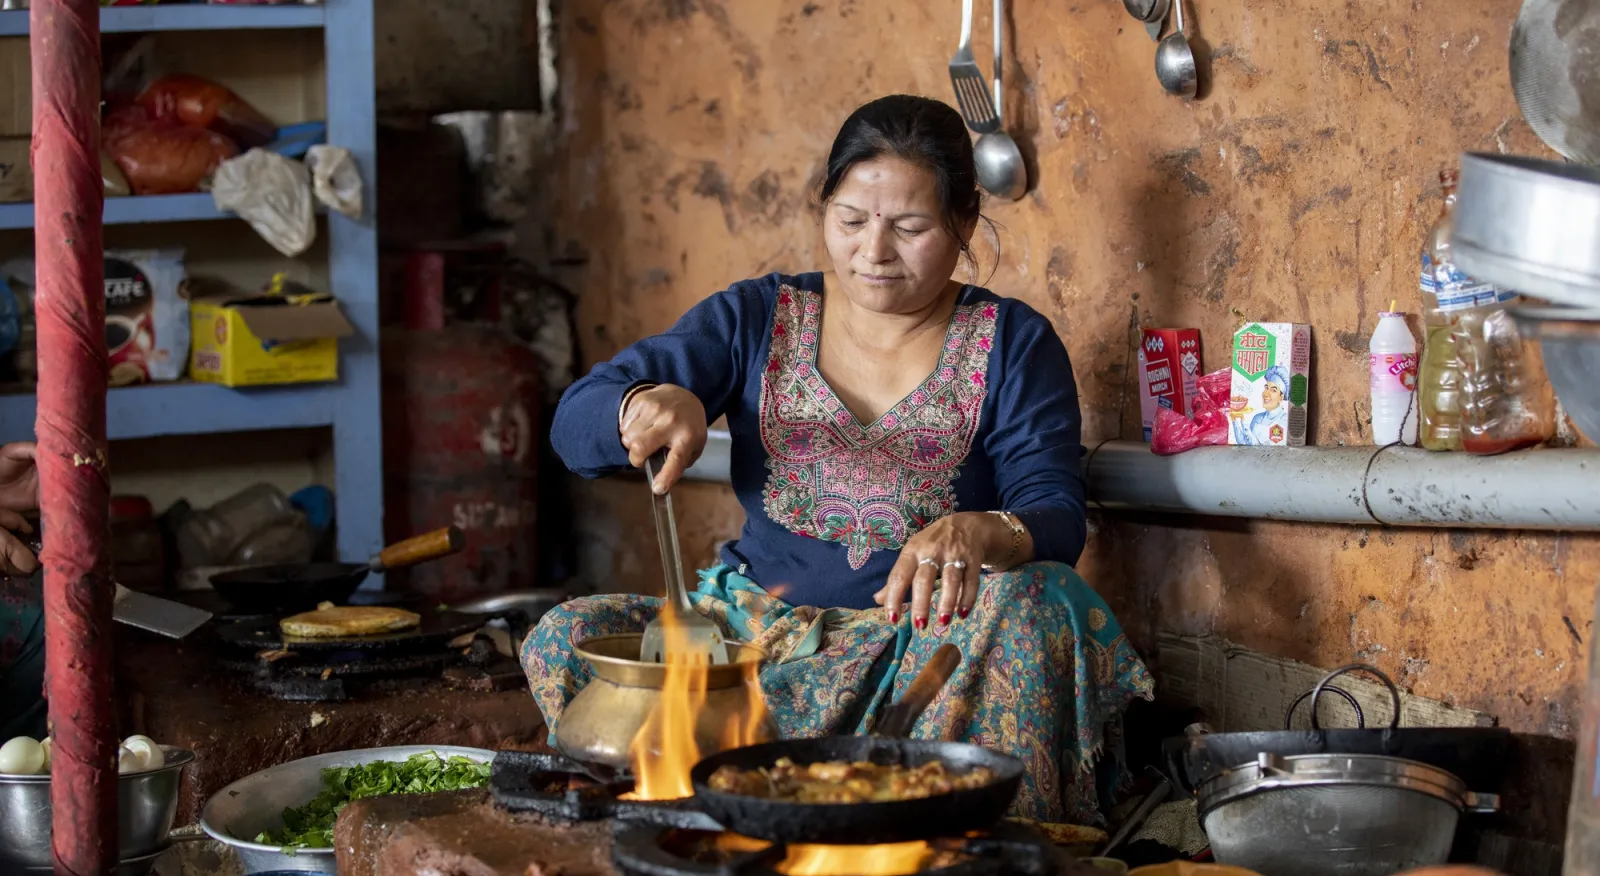 A woman sits next to an open stove preparing food.